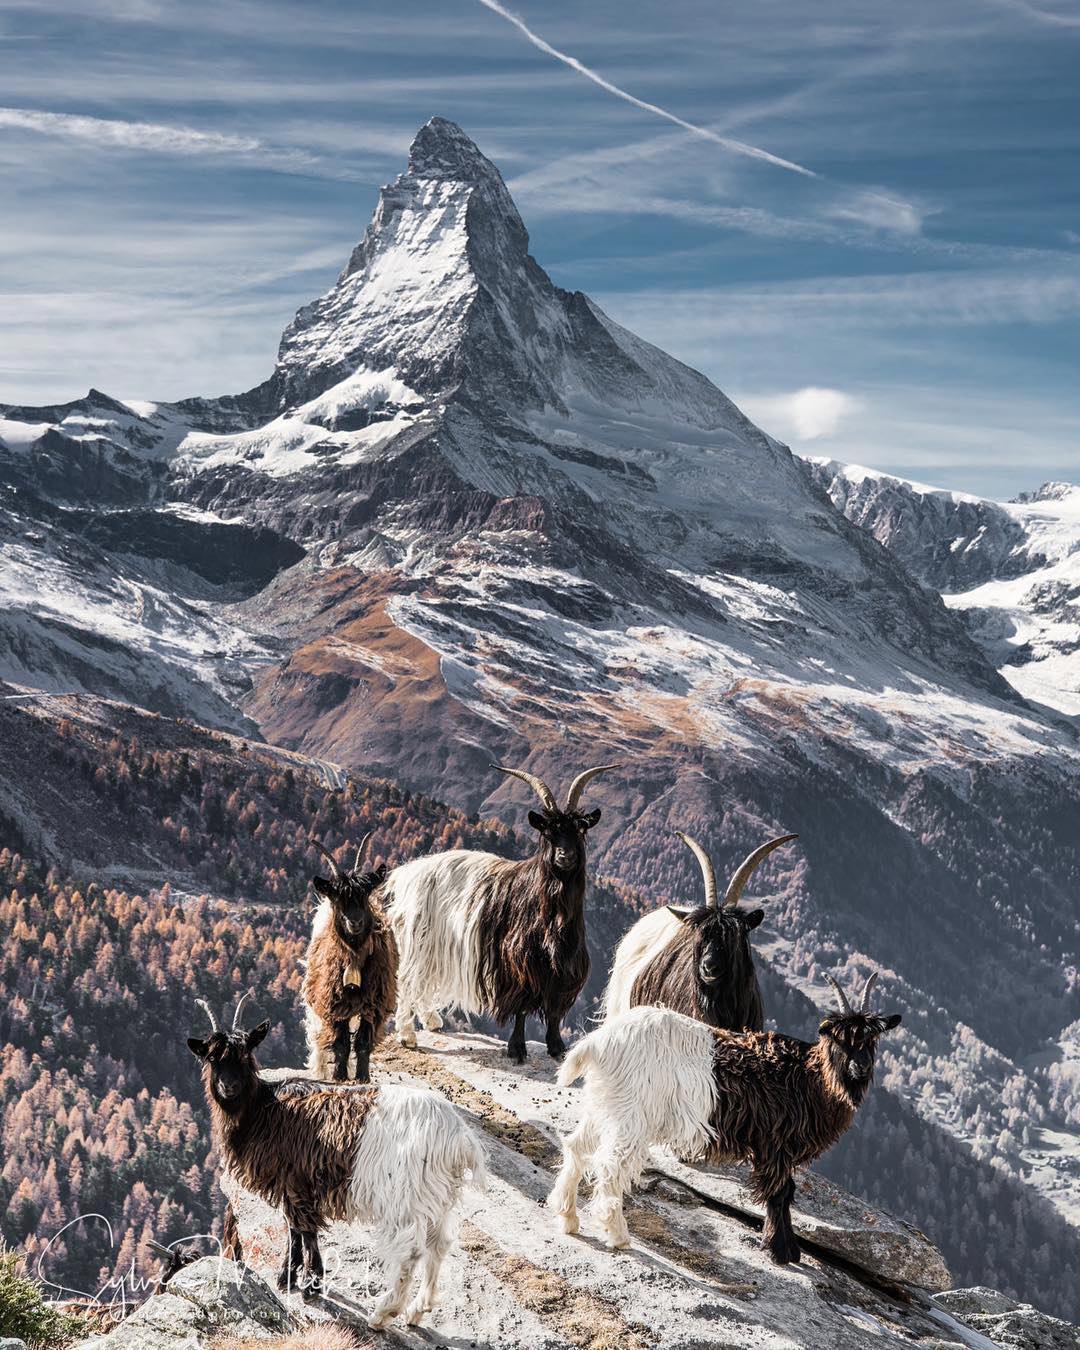 A picture of the Matterhorn with some goats.Zermatt is a top destination that should be in your bucket list. Stream bursts banks and floods Zermatt.